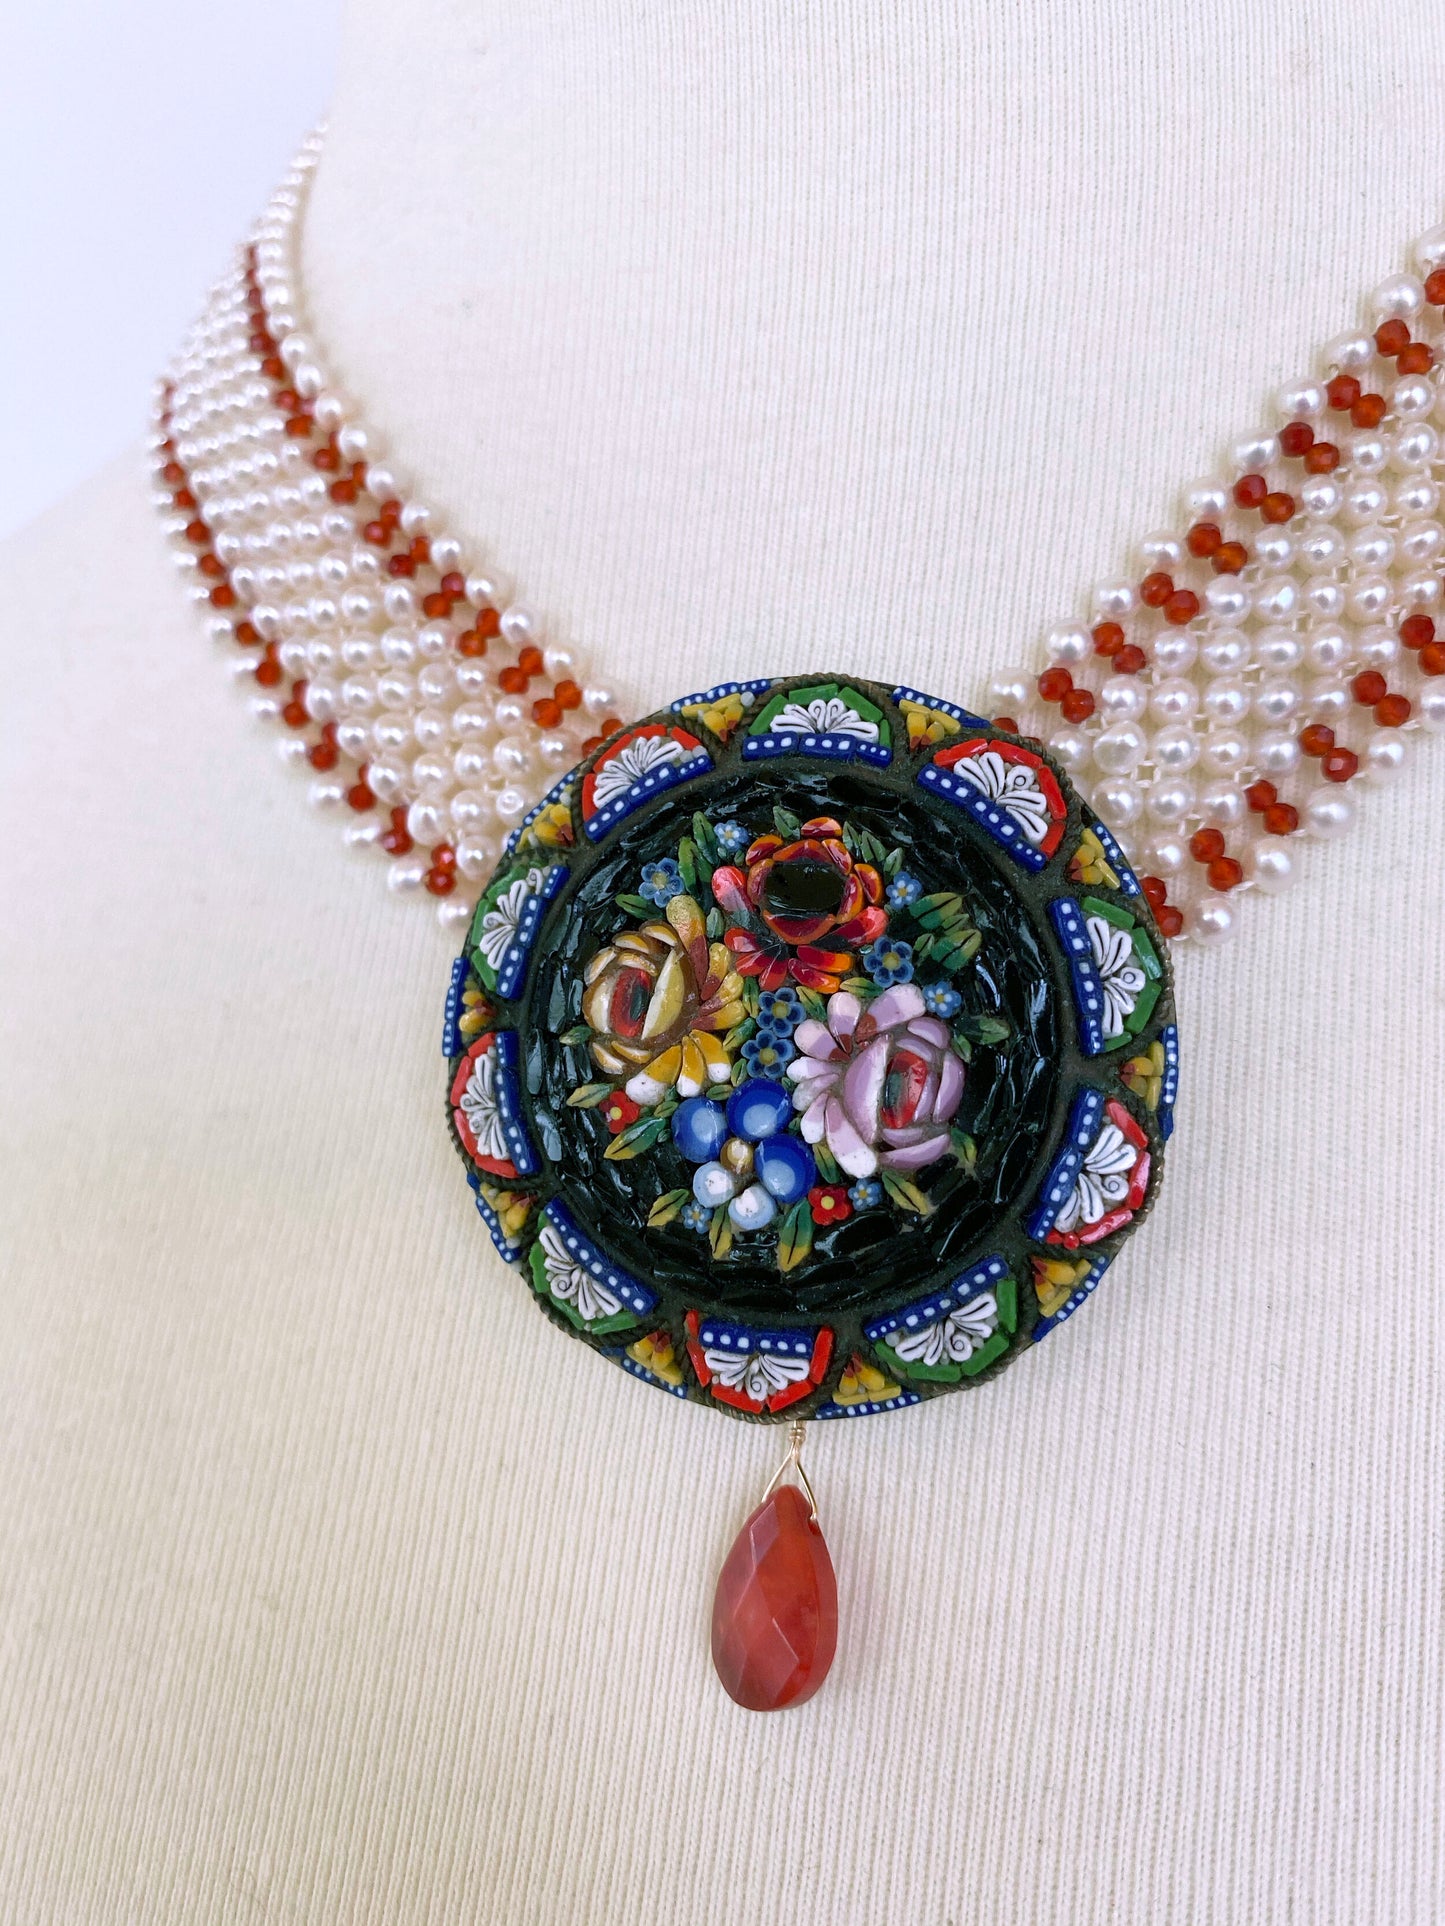 Woven Pearl and Carnelian Necklace with Mosaic Centerpiece and Coral